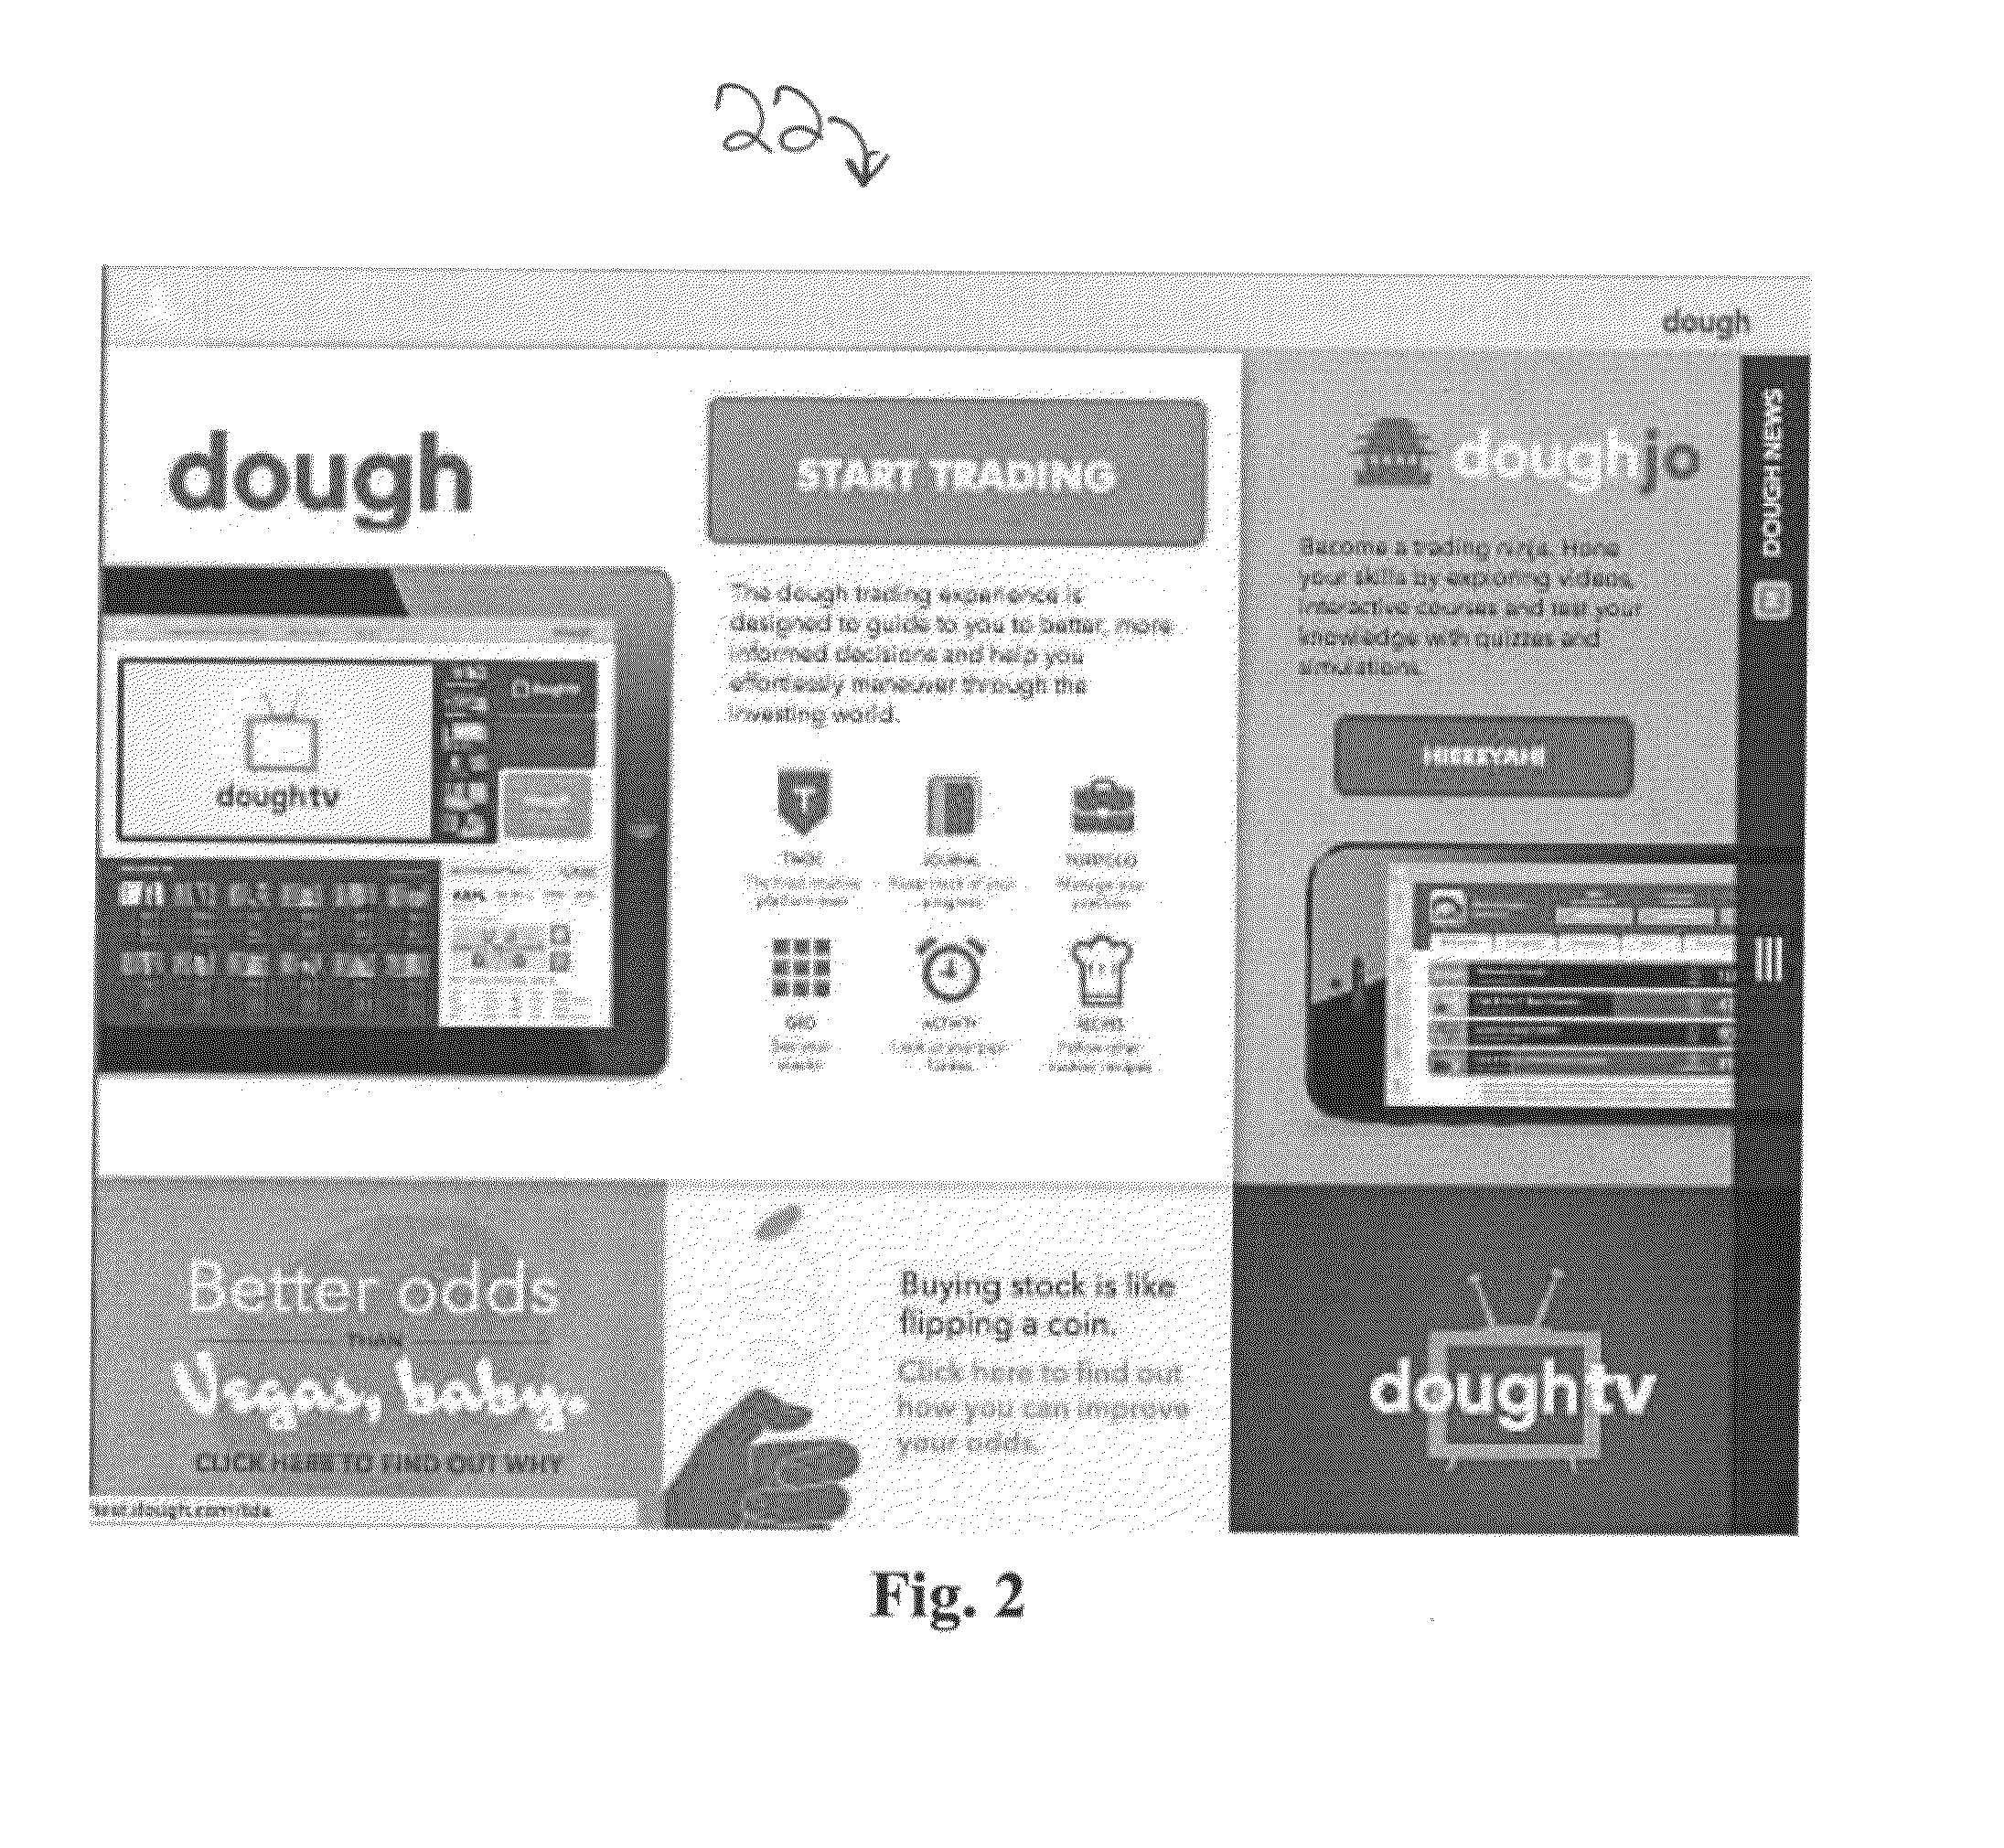 System and methods for aggregating investment, educational and entertainment data and display of the data thereof